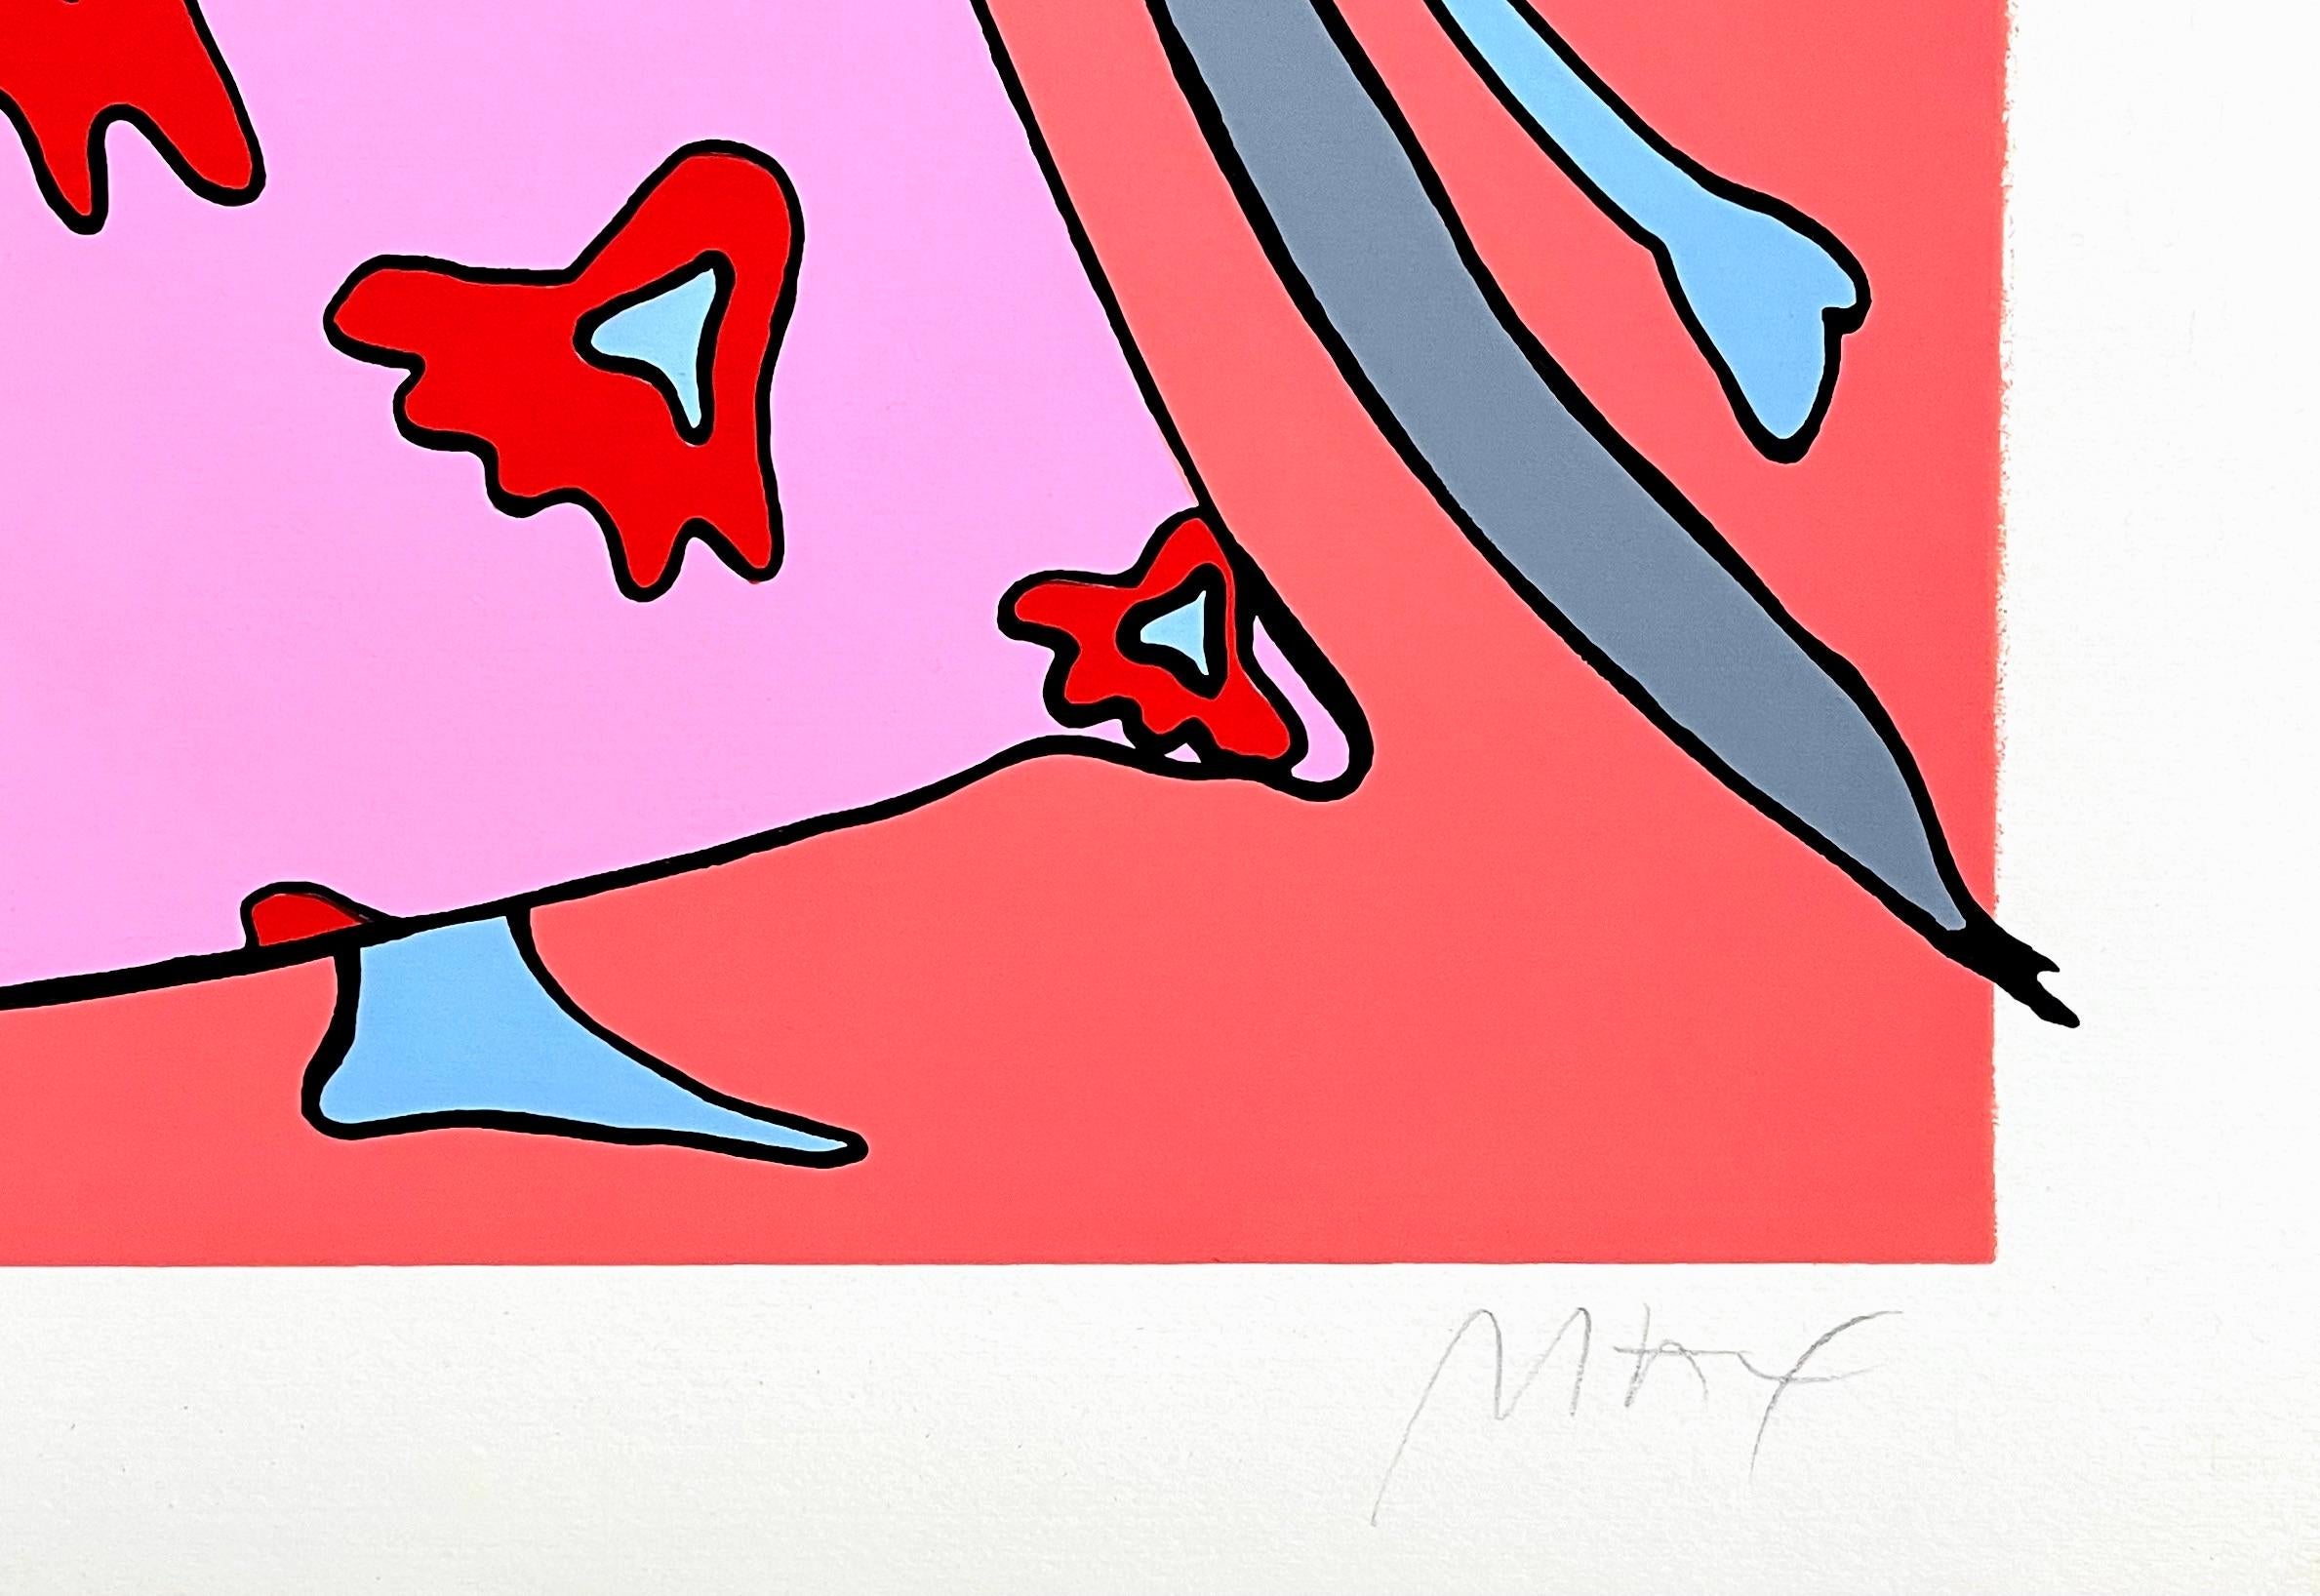 Artist: Peter Max (1937)
Title: Angel
Year: 1978
Edition: 234/250, plus proofs
Medium: Silkscreen on Fabriano Rosapina paper
Size: 22 x 30 inches
Condition: Excellent
Inscription: Signed and numbered by the artist.
Notes: Published by Via